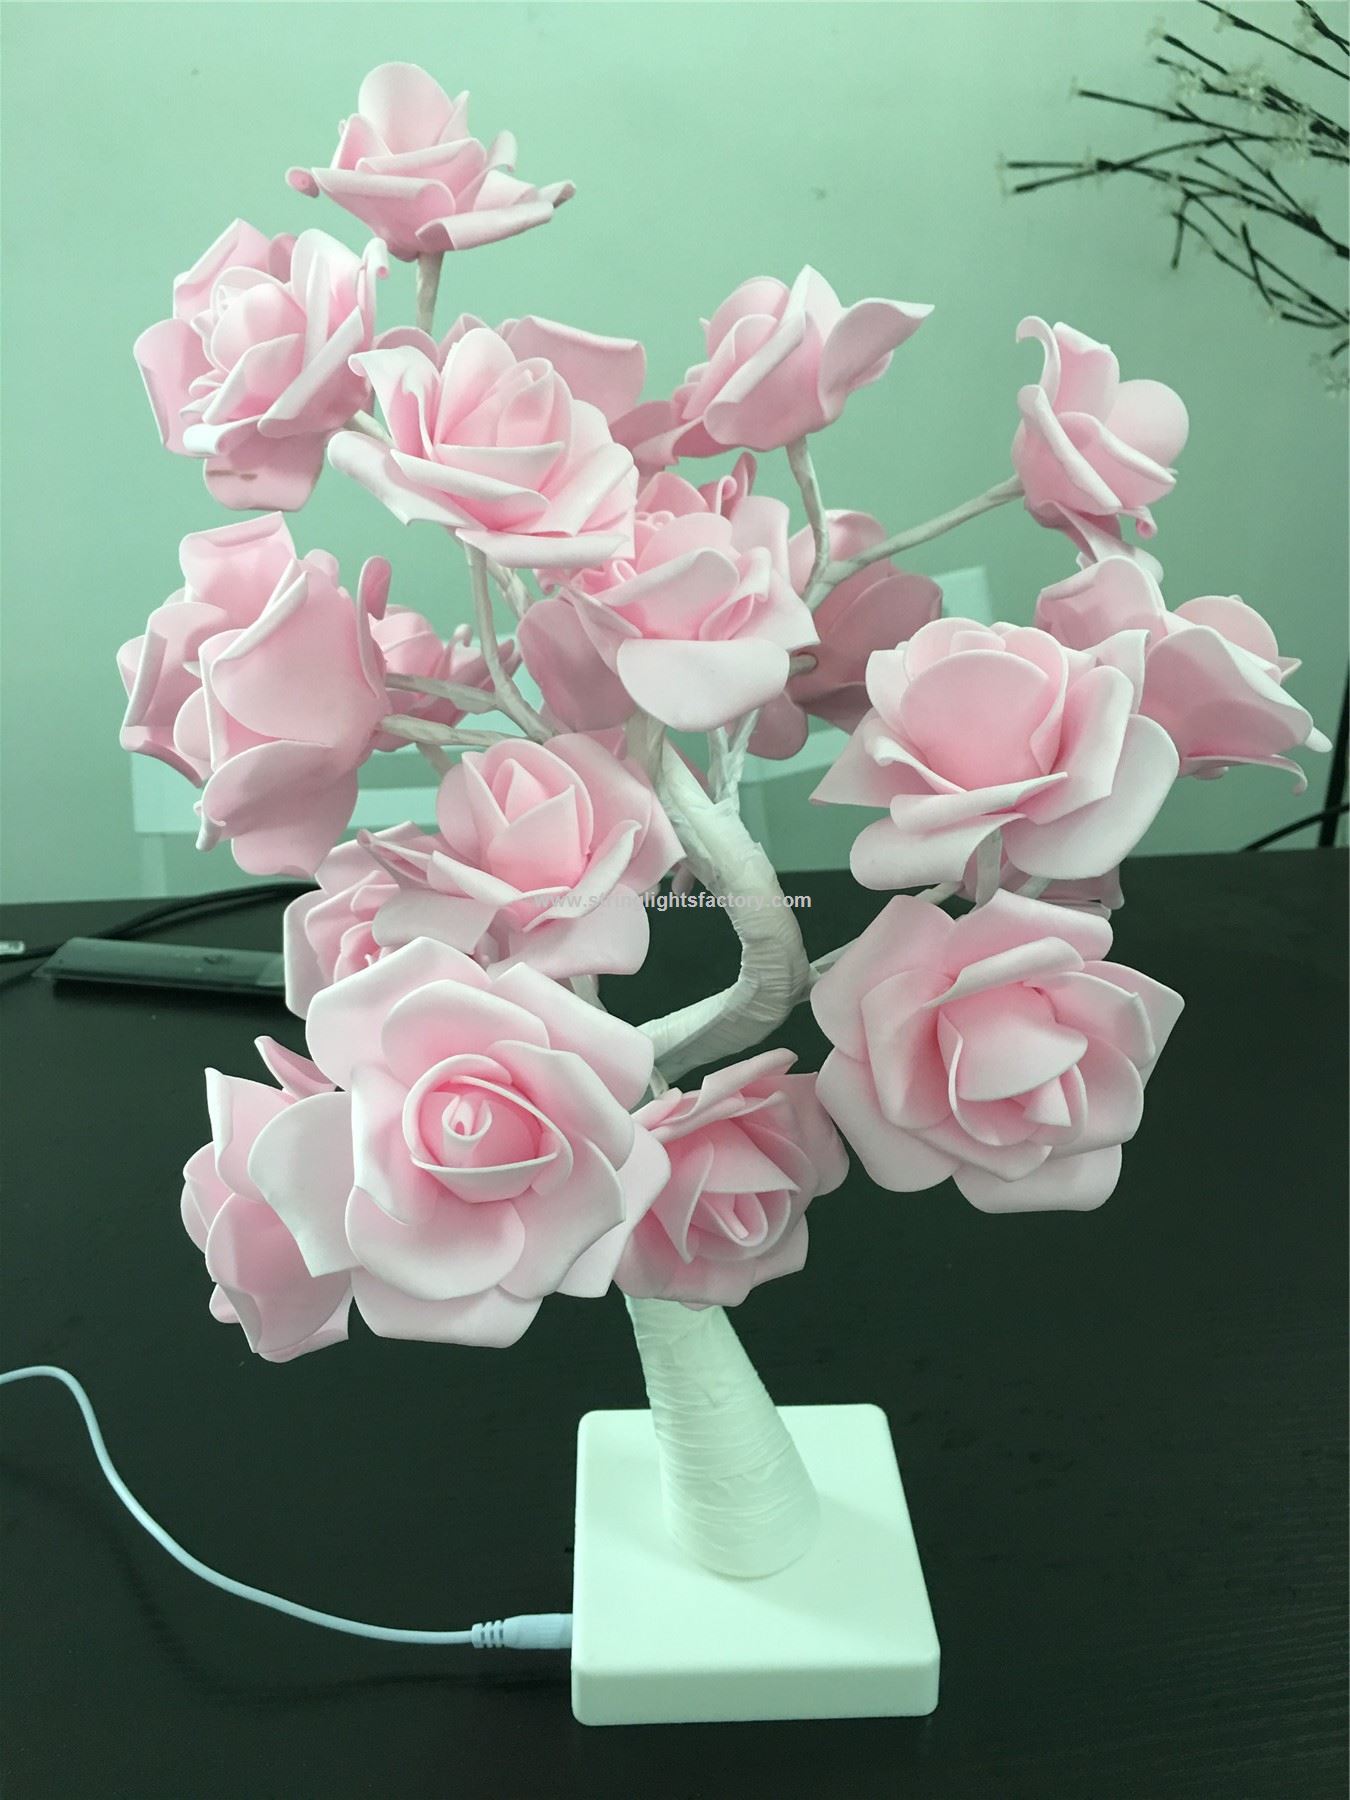 Pink Rose Table Light Battery Operated Night Lights Warm White Desk Lamp